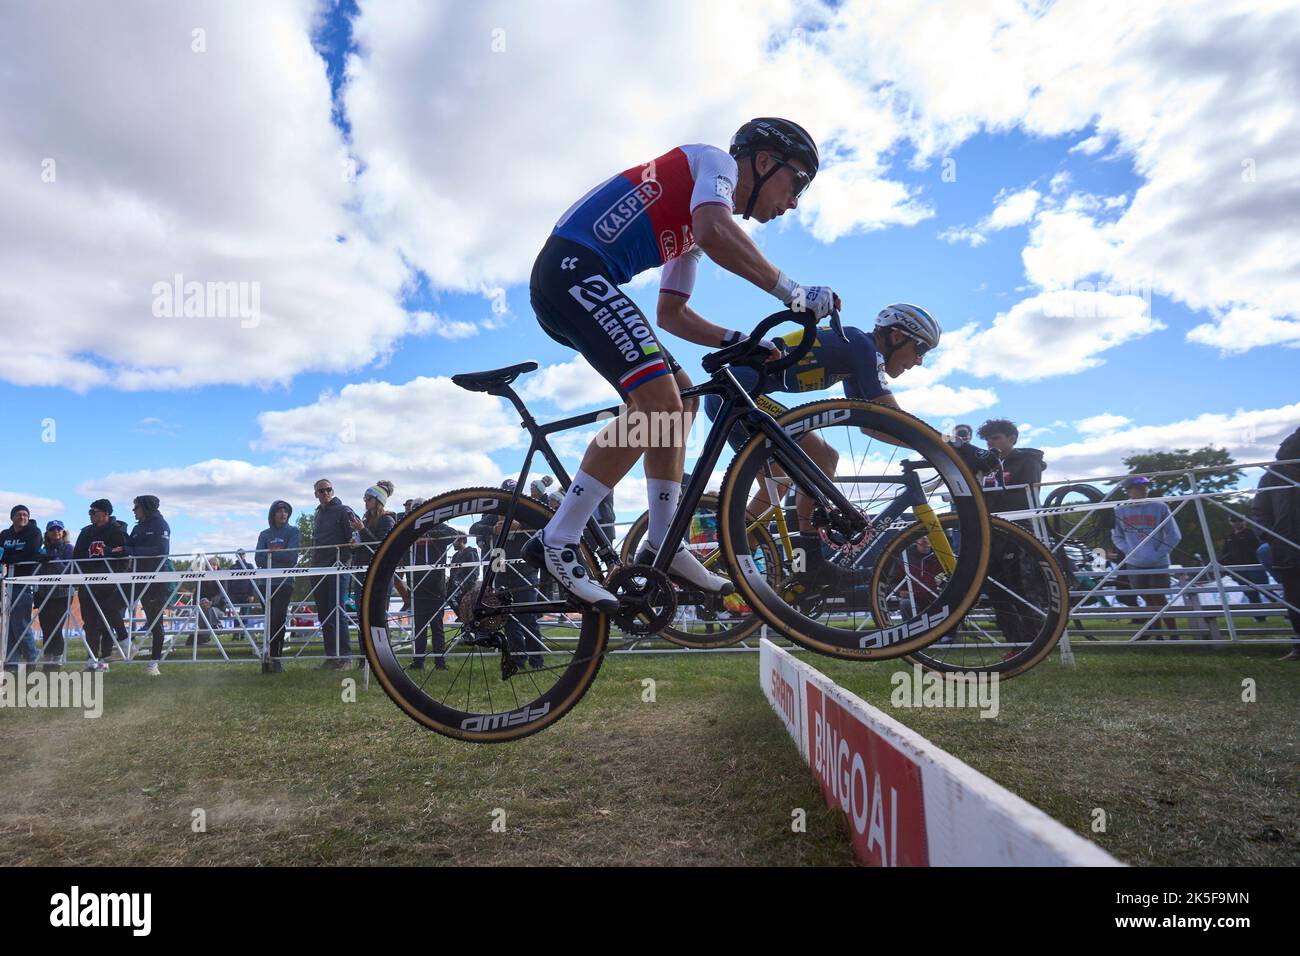 the men race at the Trek CXC Cup, a cyclocross cycling race in Waterloo (WI), USA,